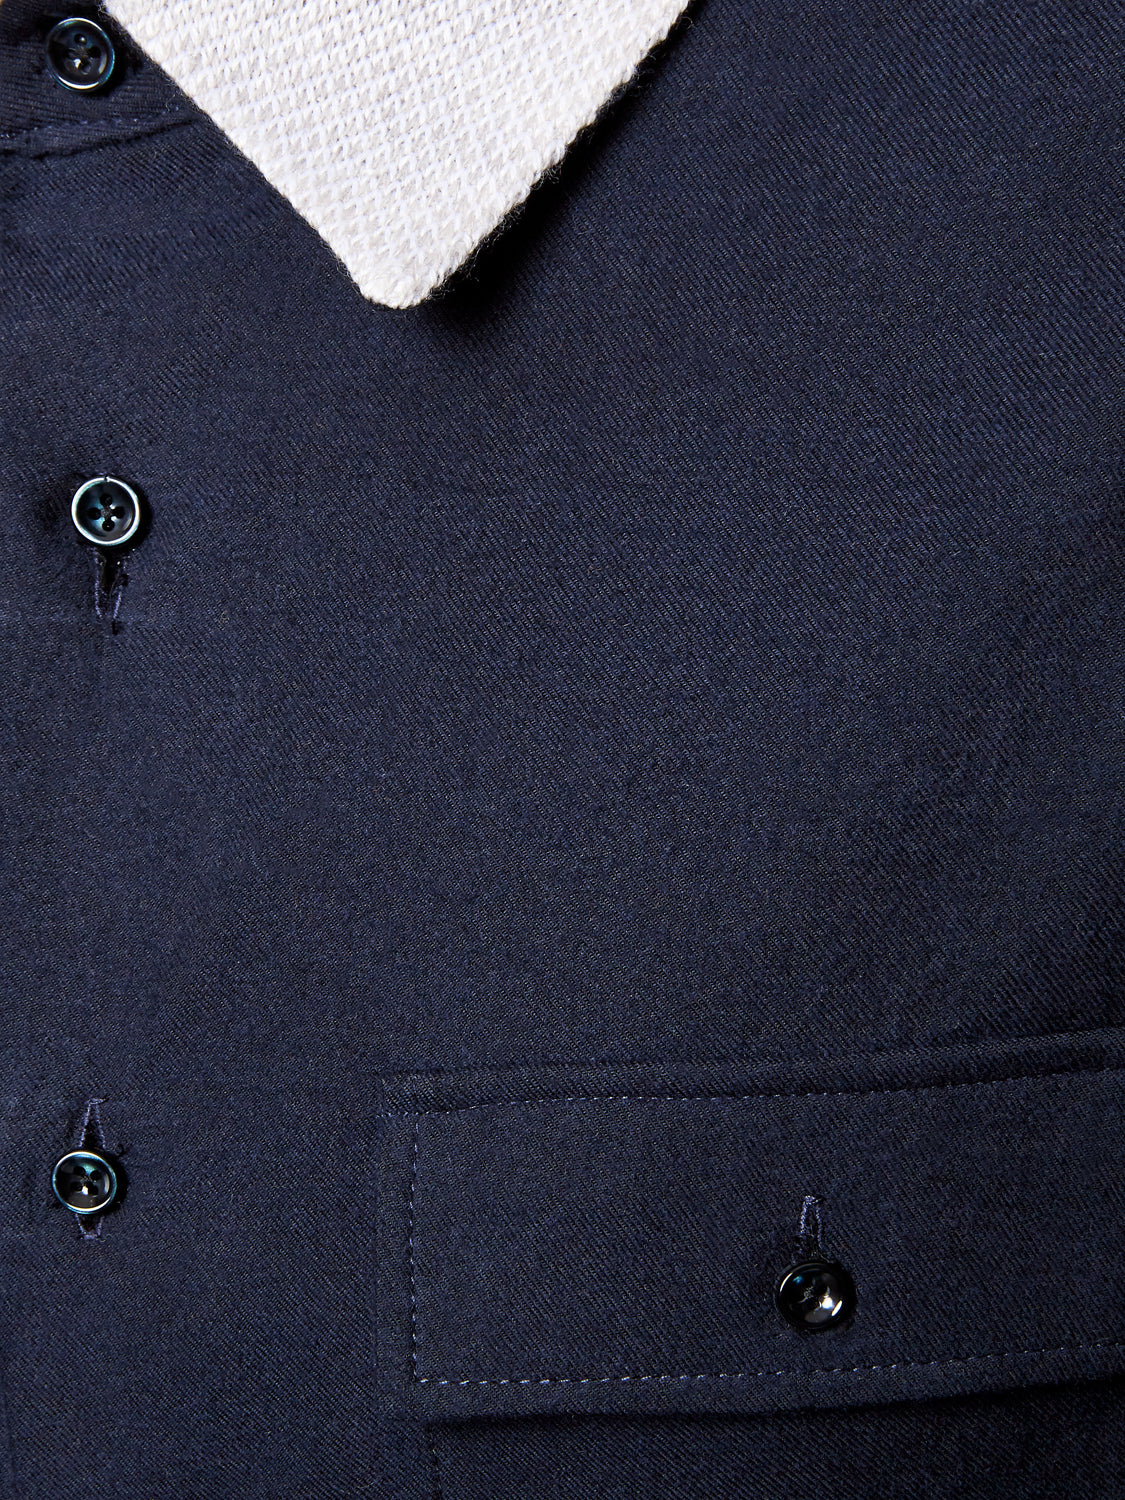 Oyster White Knit Collar Navy Slim Fit Shirt